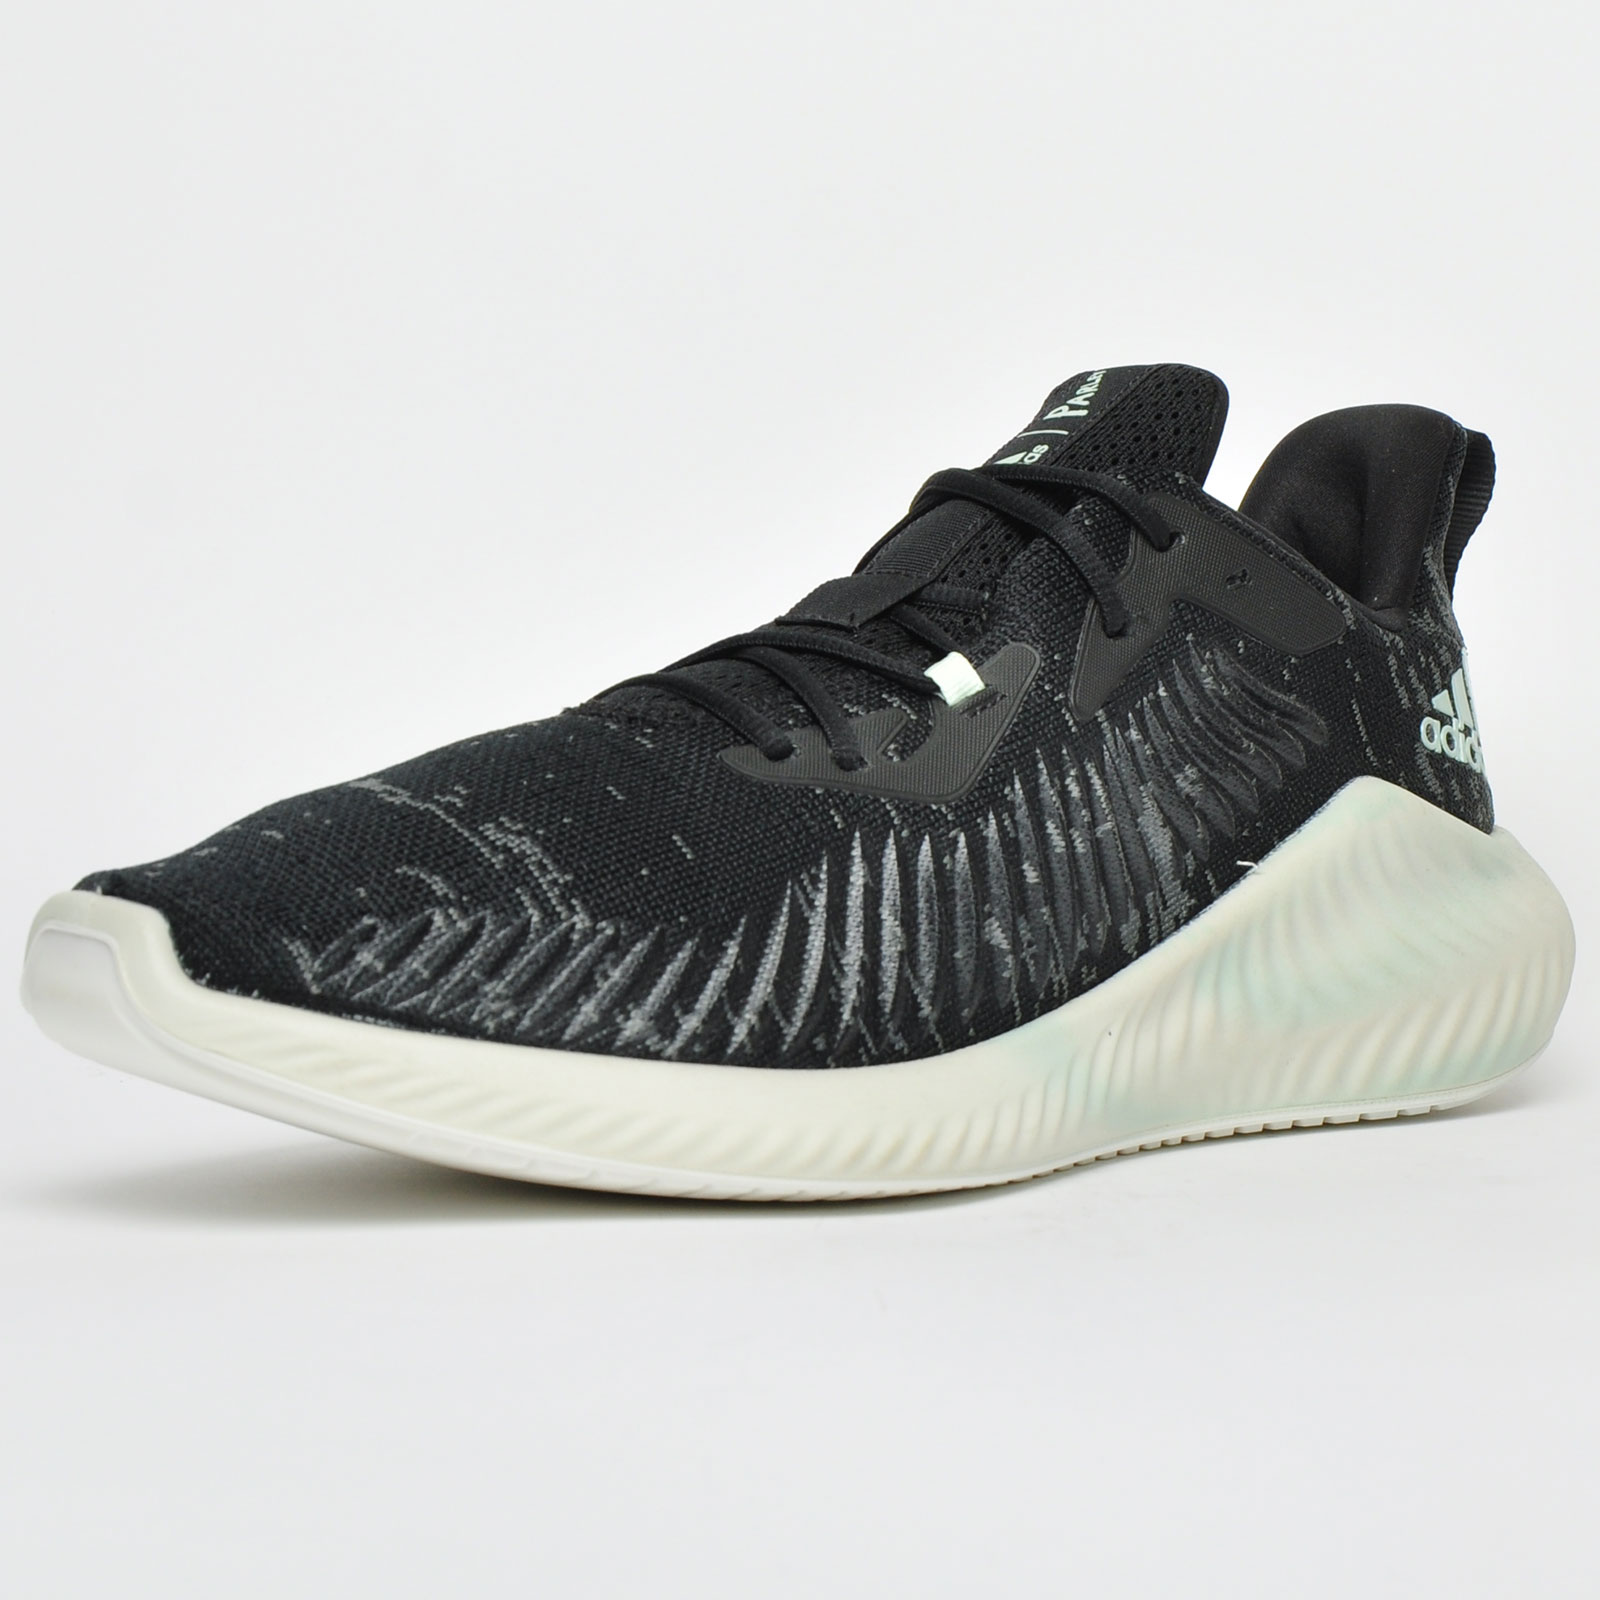 Adidas Alphabounce Parley Men's Running Shoes Fitness Gym Trainers ...